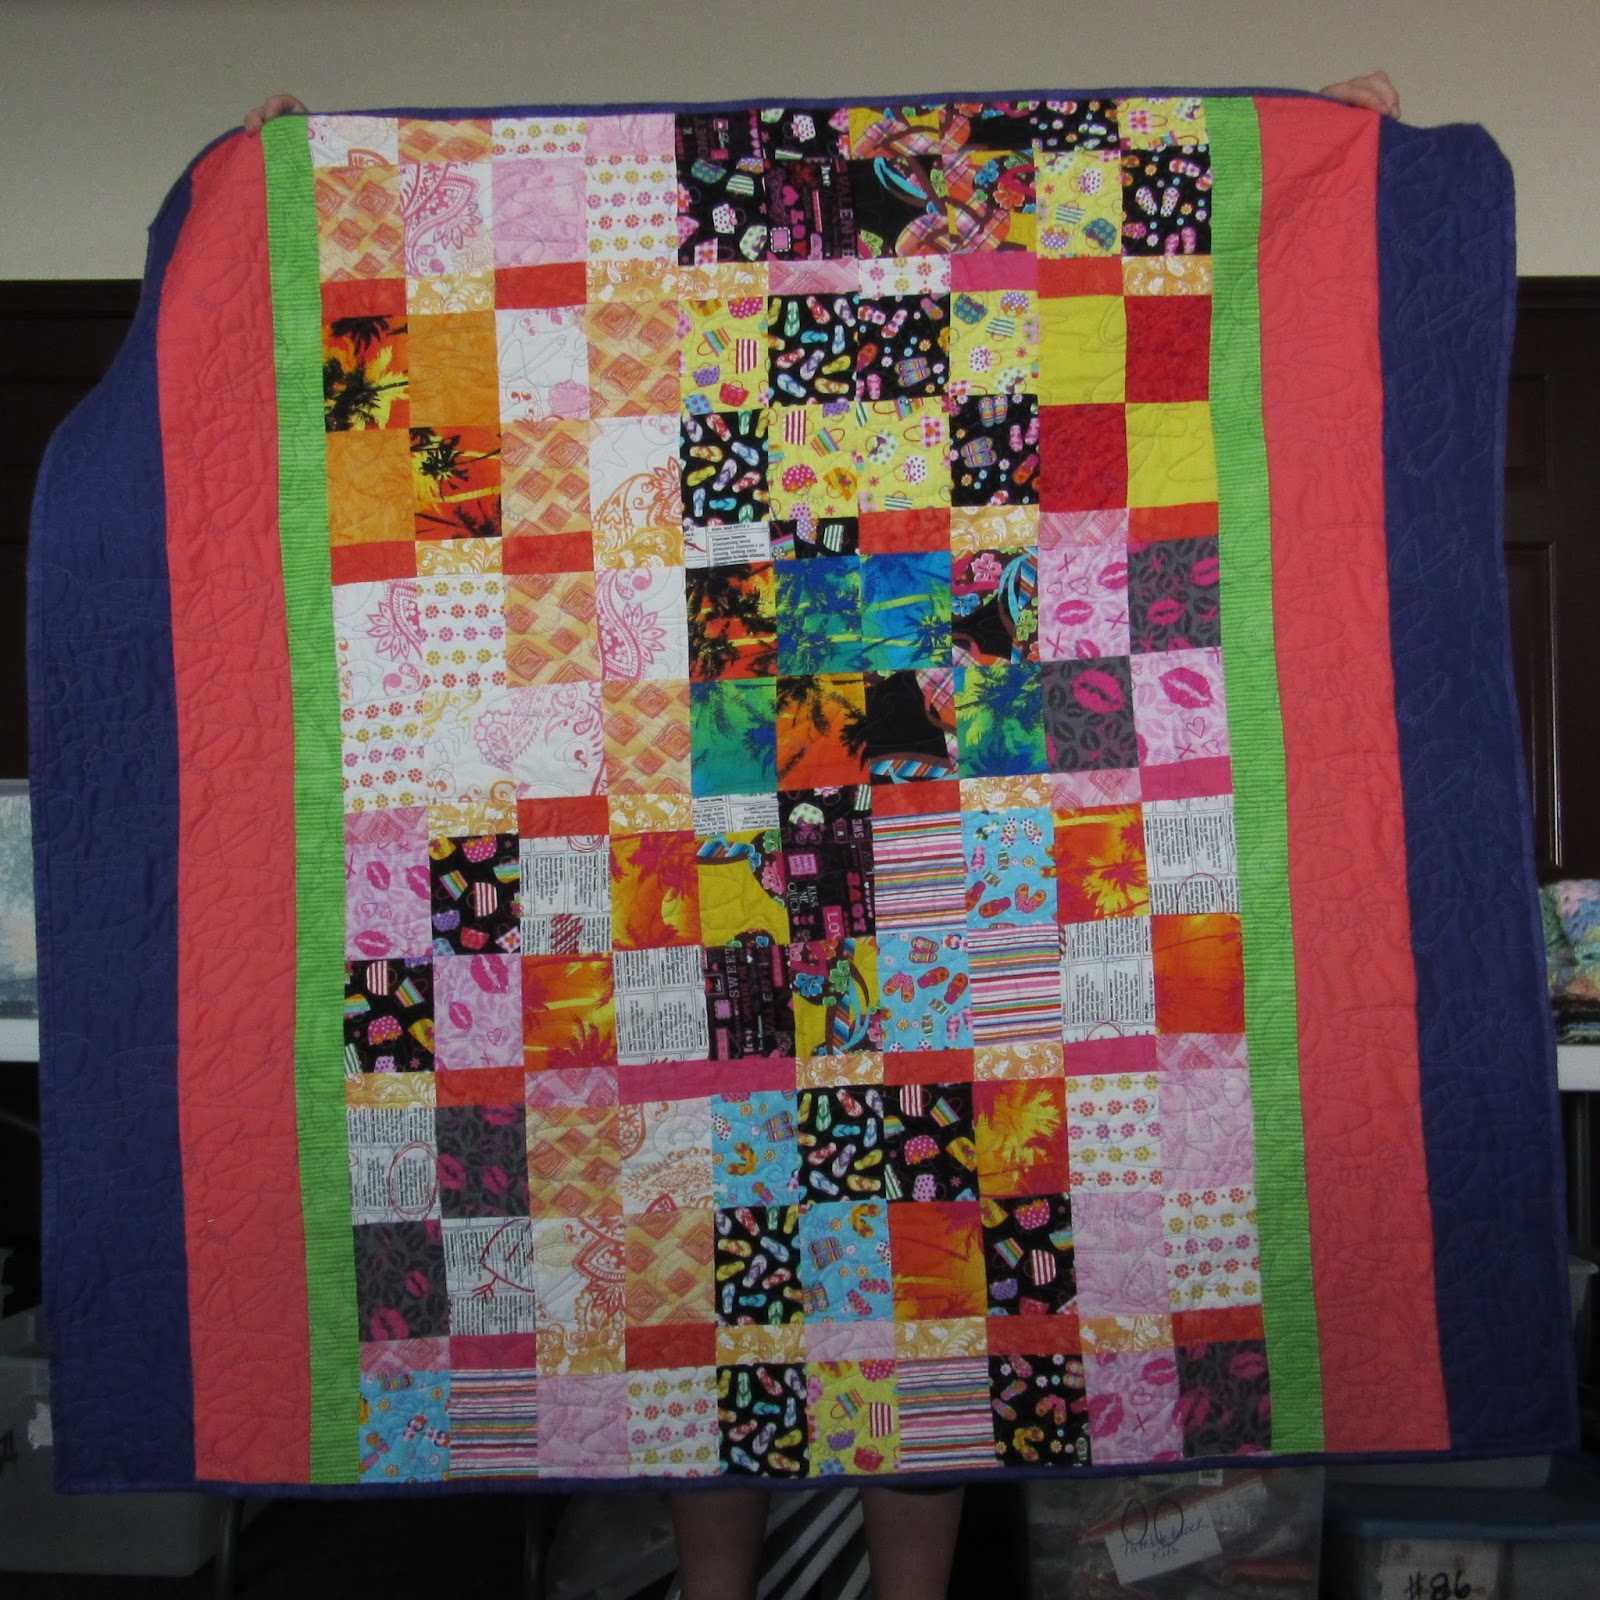 The Linus Connection: July 2015 Meeting with Special Quilt Con Quilts!